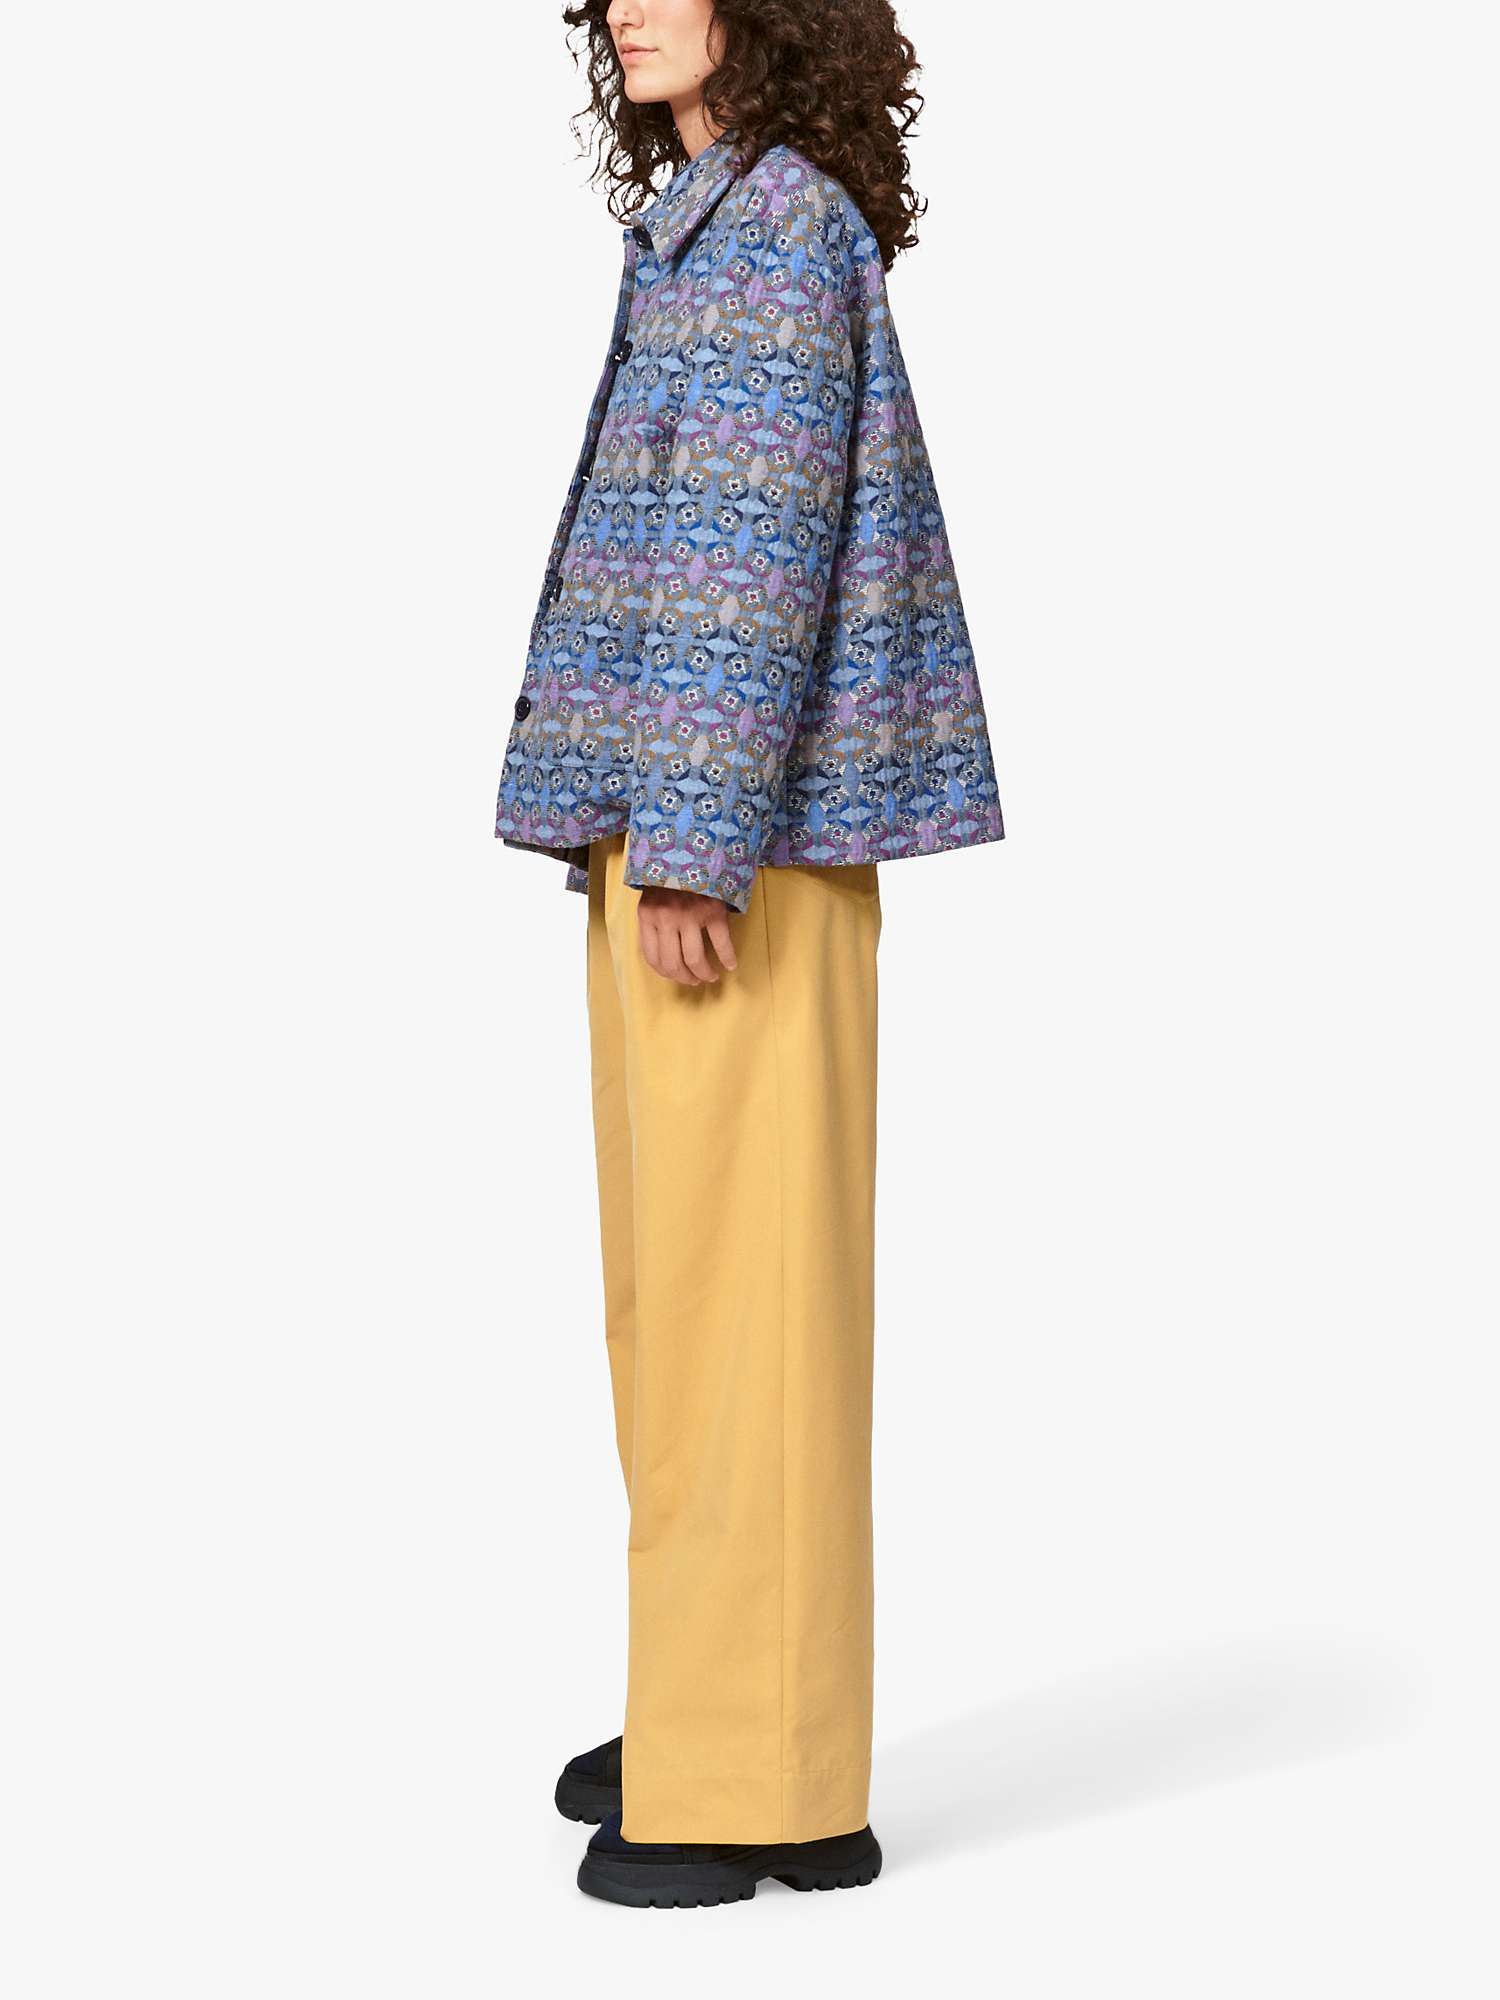 Buy nué notes Gosta Pleat Front Wide Leg Trousers, Antelope Online at johnlewis.com